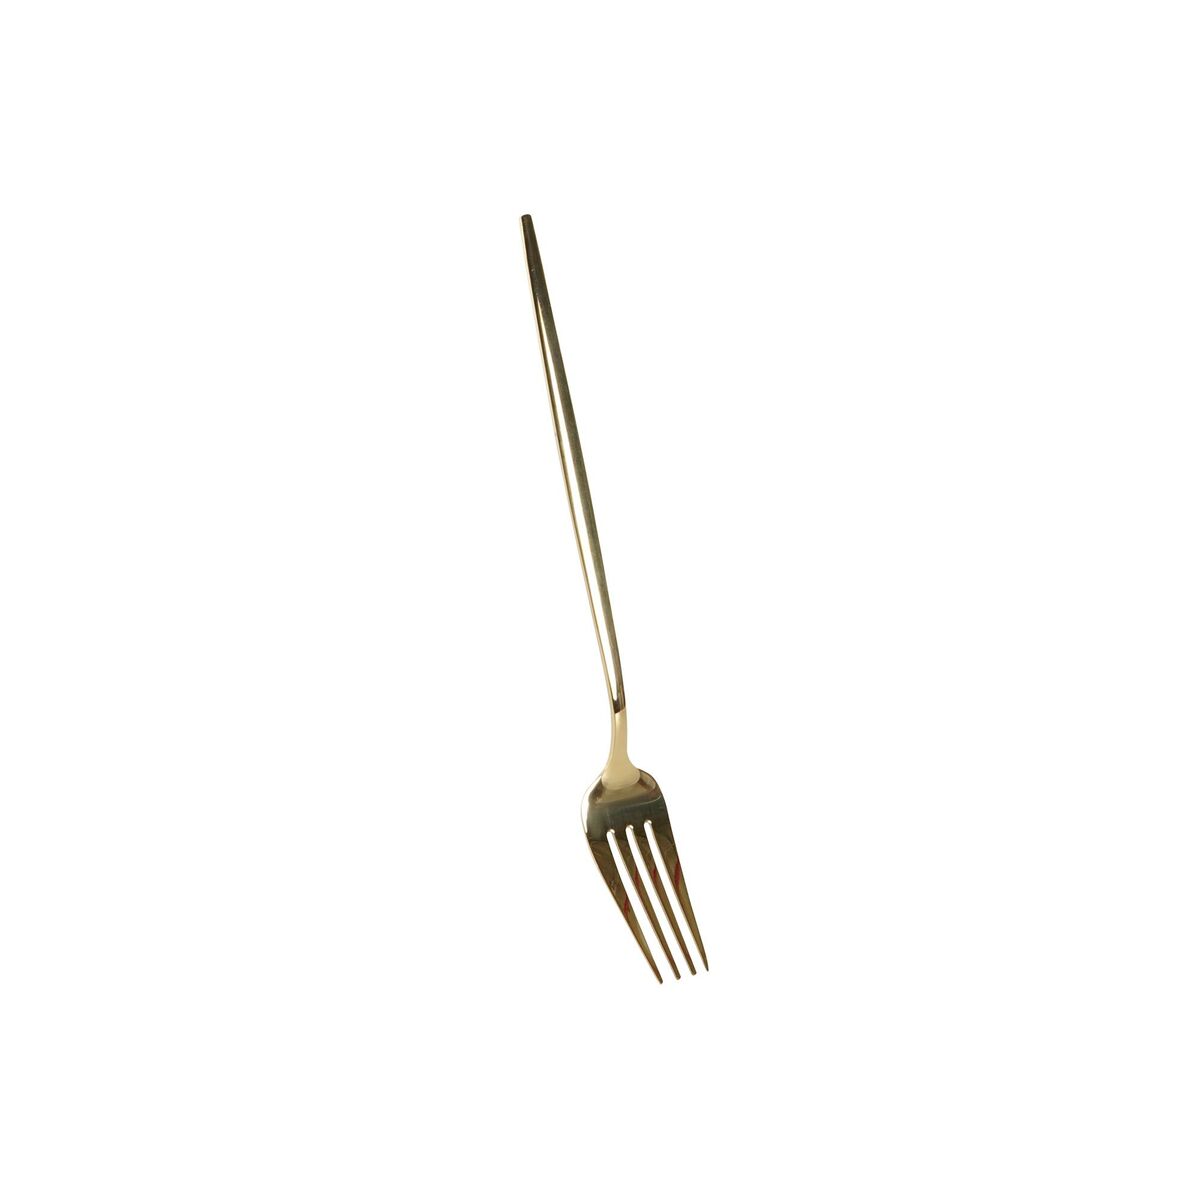 Cutlery DKD Home Decor Golden Stainless steel 3 x 1,5 x 13 cm 20 Pieces